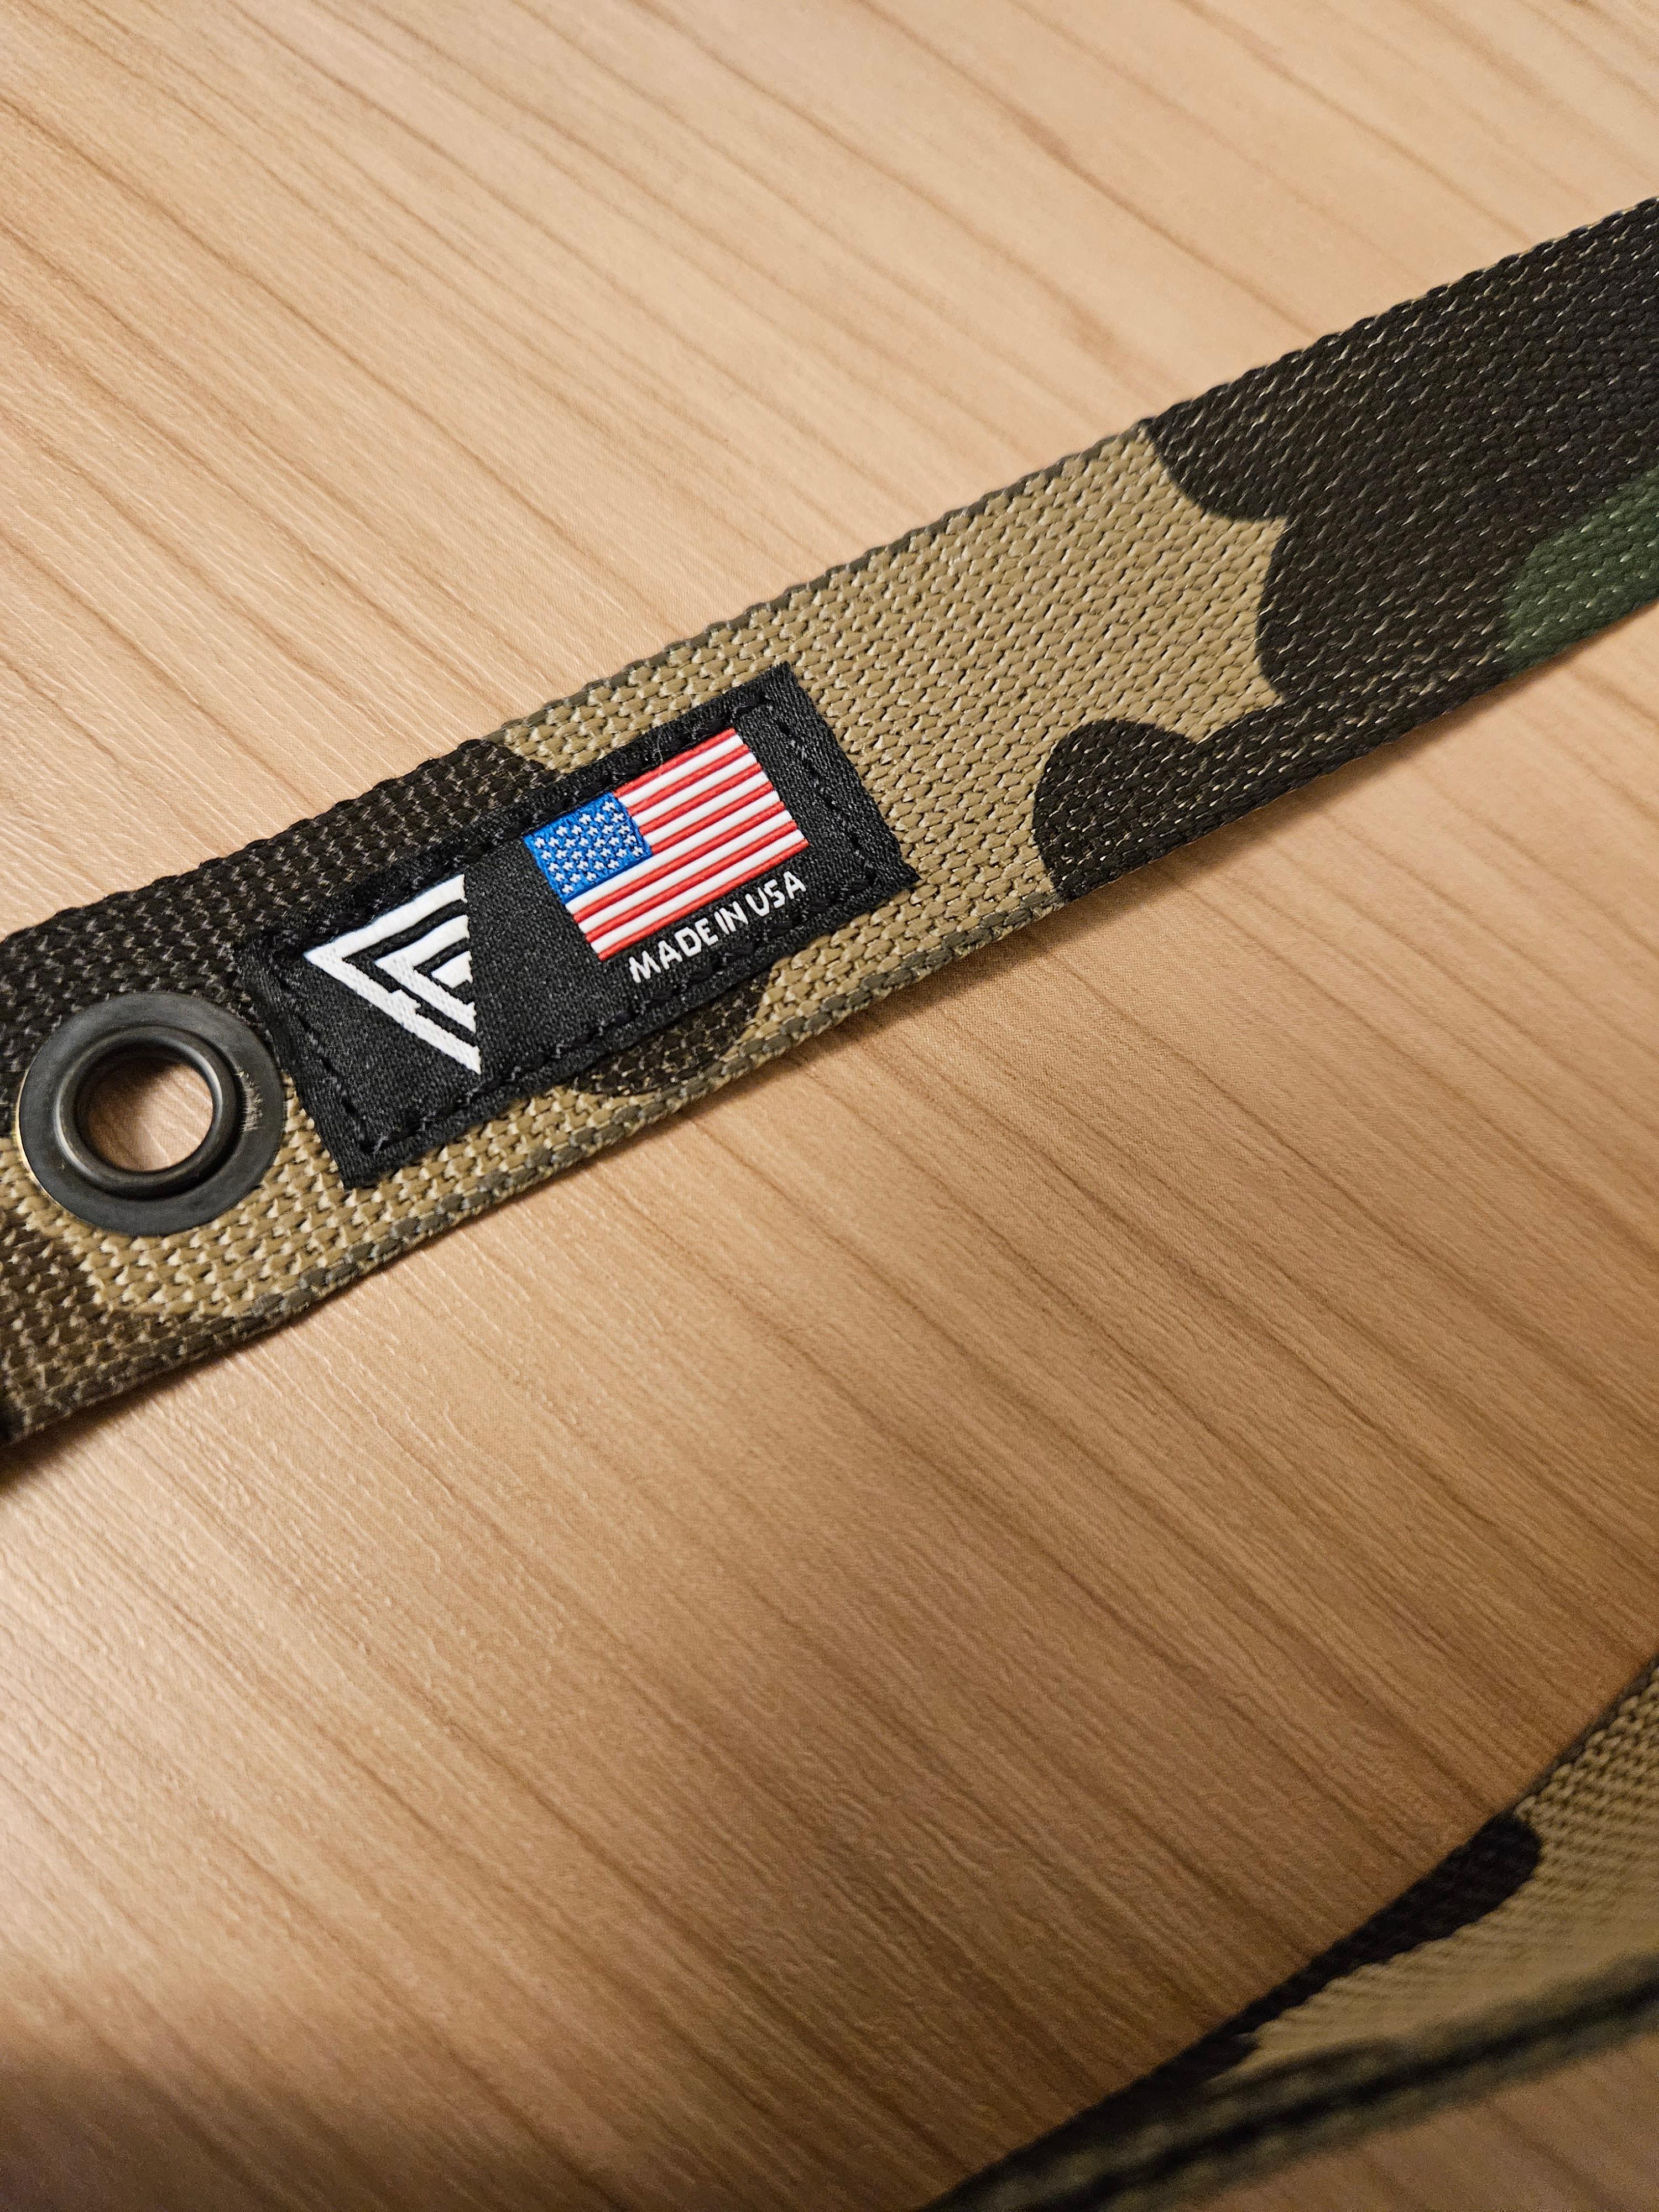 GreenBeretFoundation on X: 🇺🇸 Forge Concepts, a veteran-owned business  addressing equipment challenges, proudly presents the Holster Leg Strap in  the iconic M81 camo. Available for pre-sale from Nov 15-30. Choose between  standard